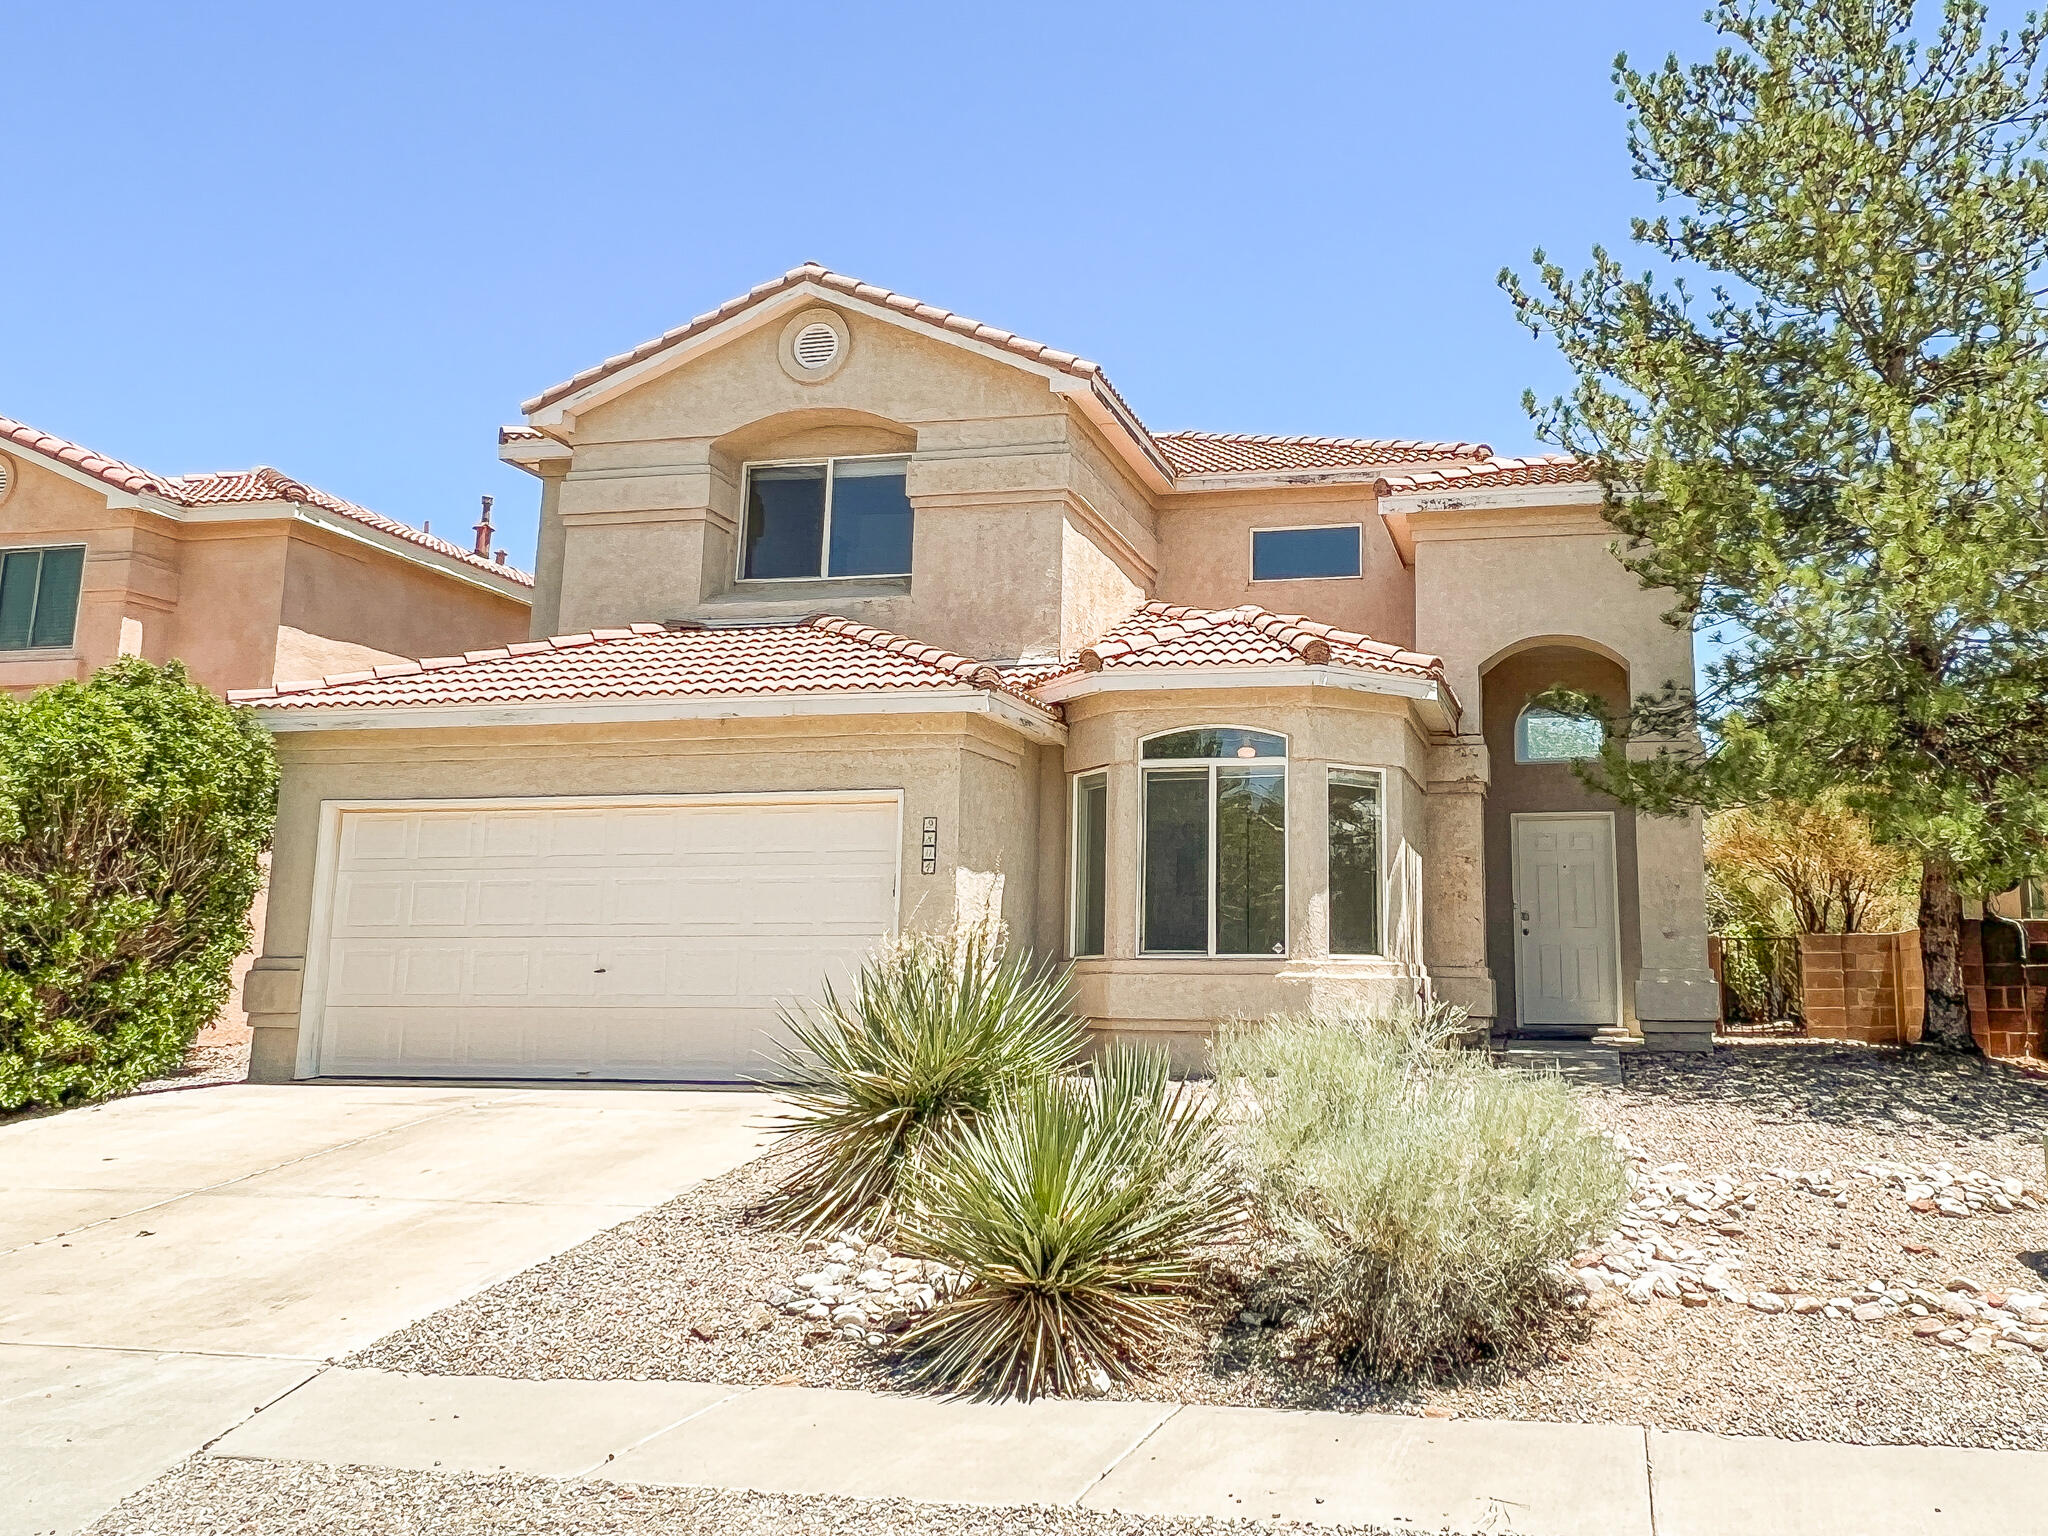 Open Houses: Saturday, 10/1, 1-3pm and Sunday, 10/2, 1-3 pm. Beautiful mountain views from this 4 bedroom, 2 3/4 bath home. Living room, family room, open kitchen. Master Bedroom has balcony with mountain views, 2 other bedrooms upstairs share a Jack and Jill bath. Guest bedroom on main with separate 3/4 bathroom. Lots of closet space. Natural light, massive windows, cathedral ceilings. Backyard with patio, mature trees. Backyard landscaping completed. Offer now!